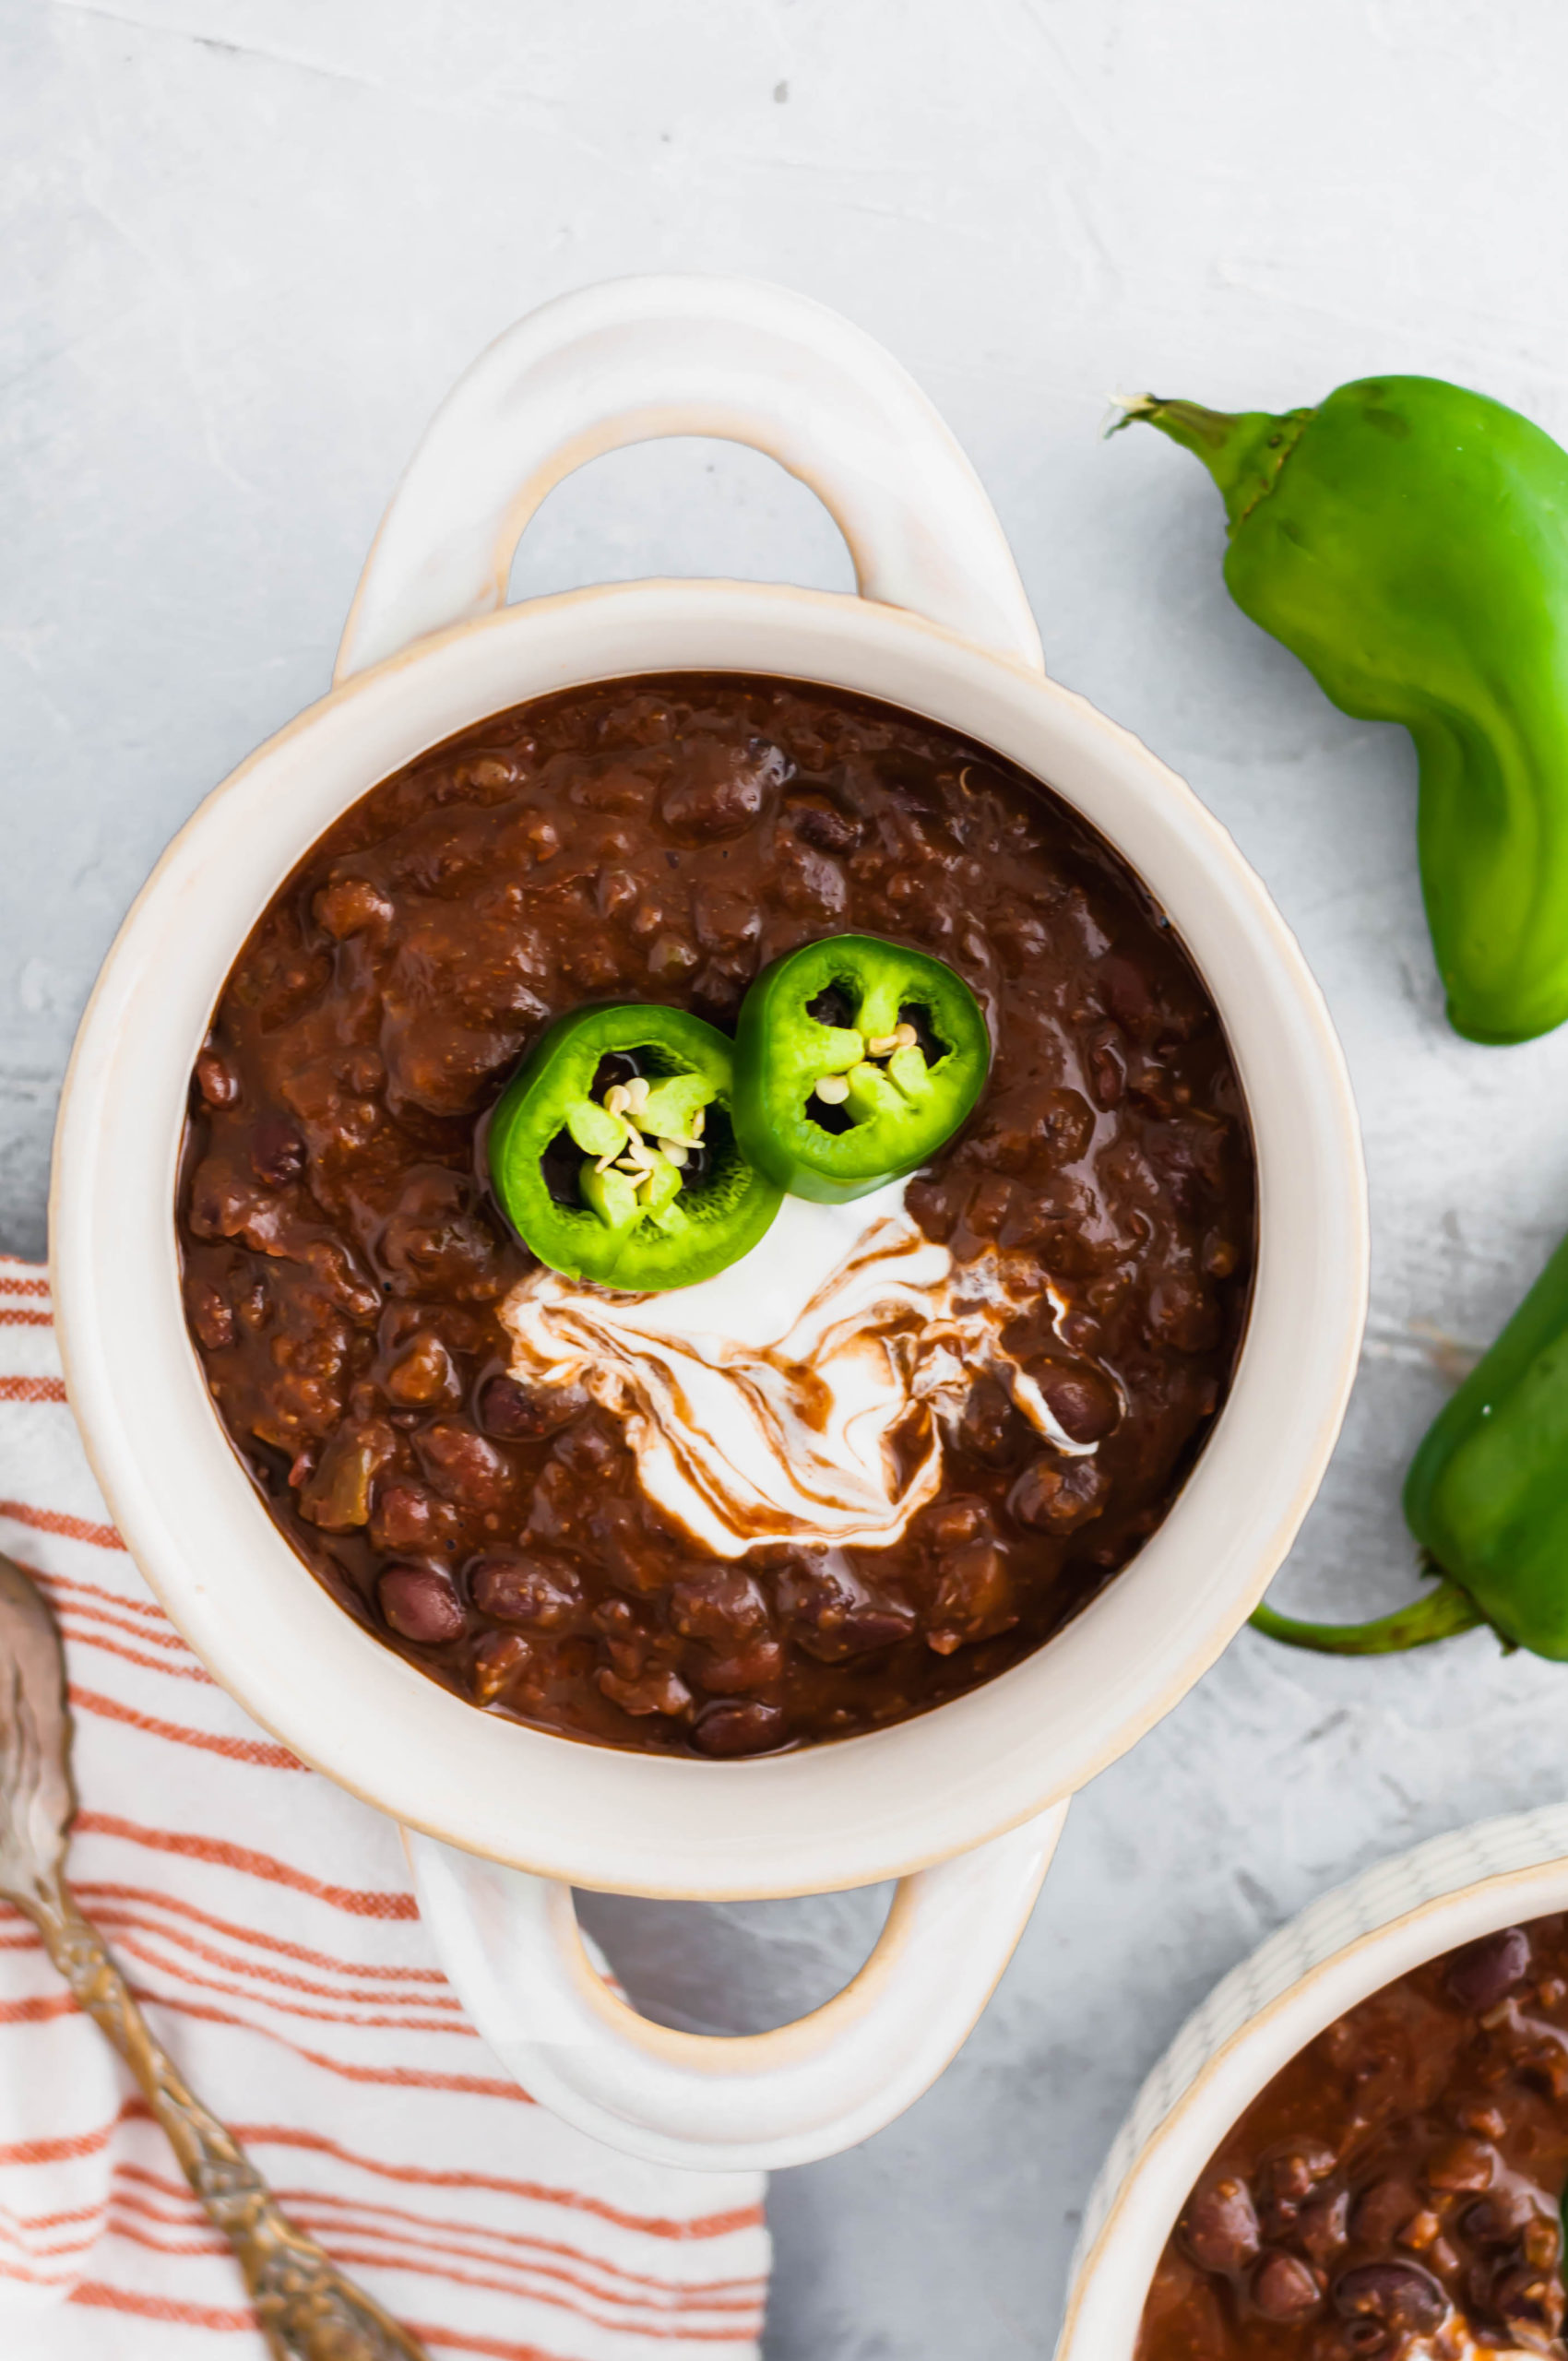 Don't let the falling temperatures bring you down. This Spicy Black Bean Soup is just what you this fall and winter to keep you warm and cozy.